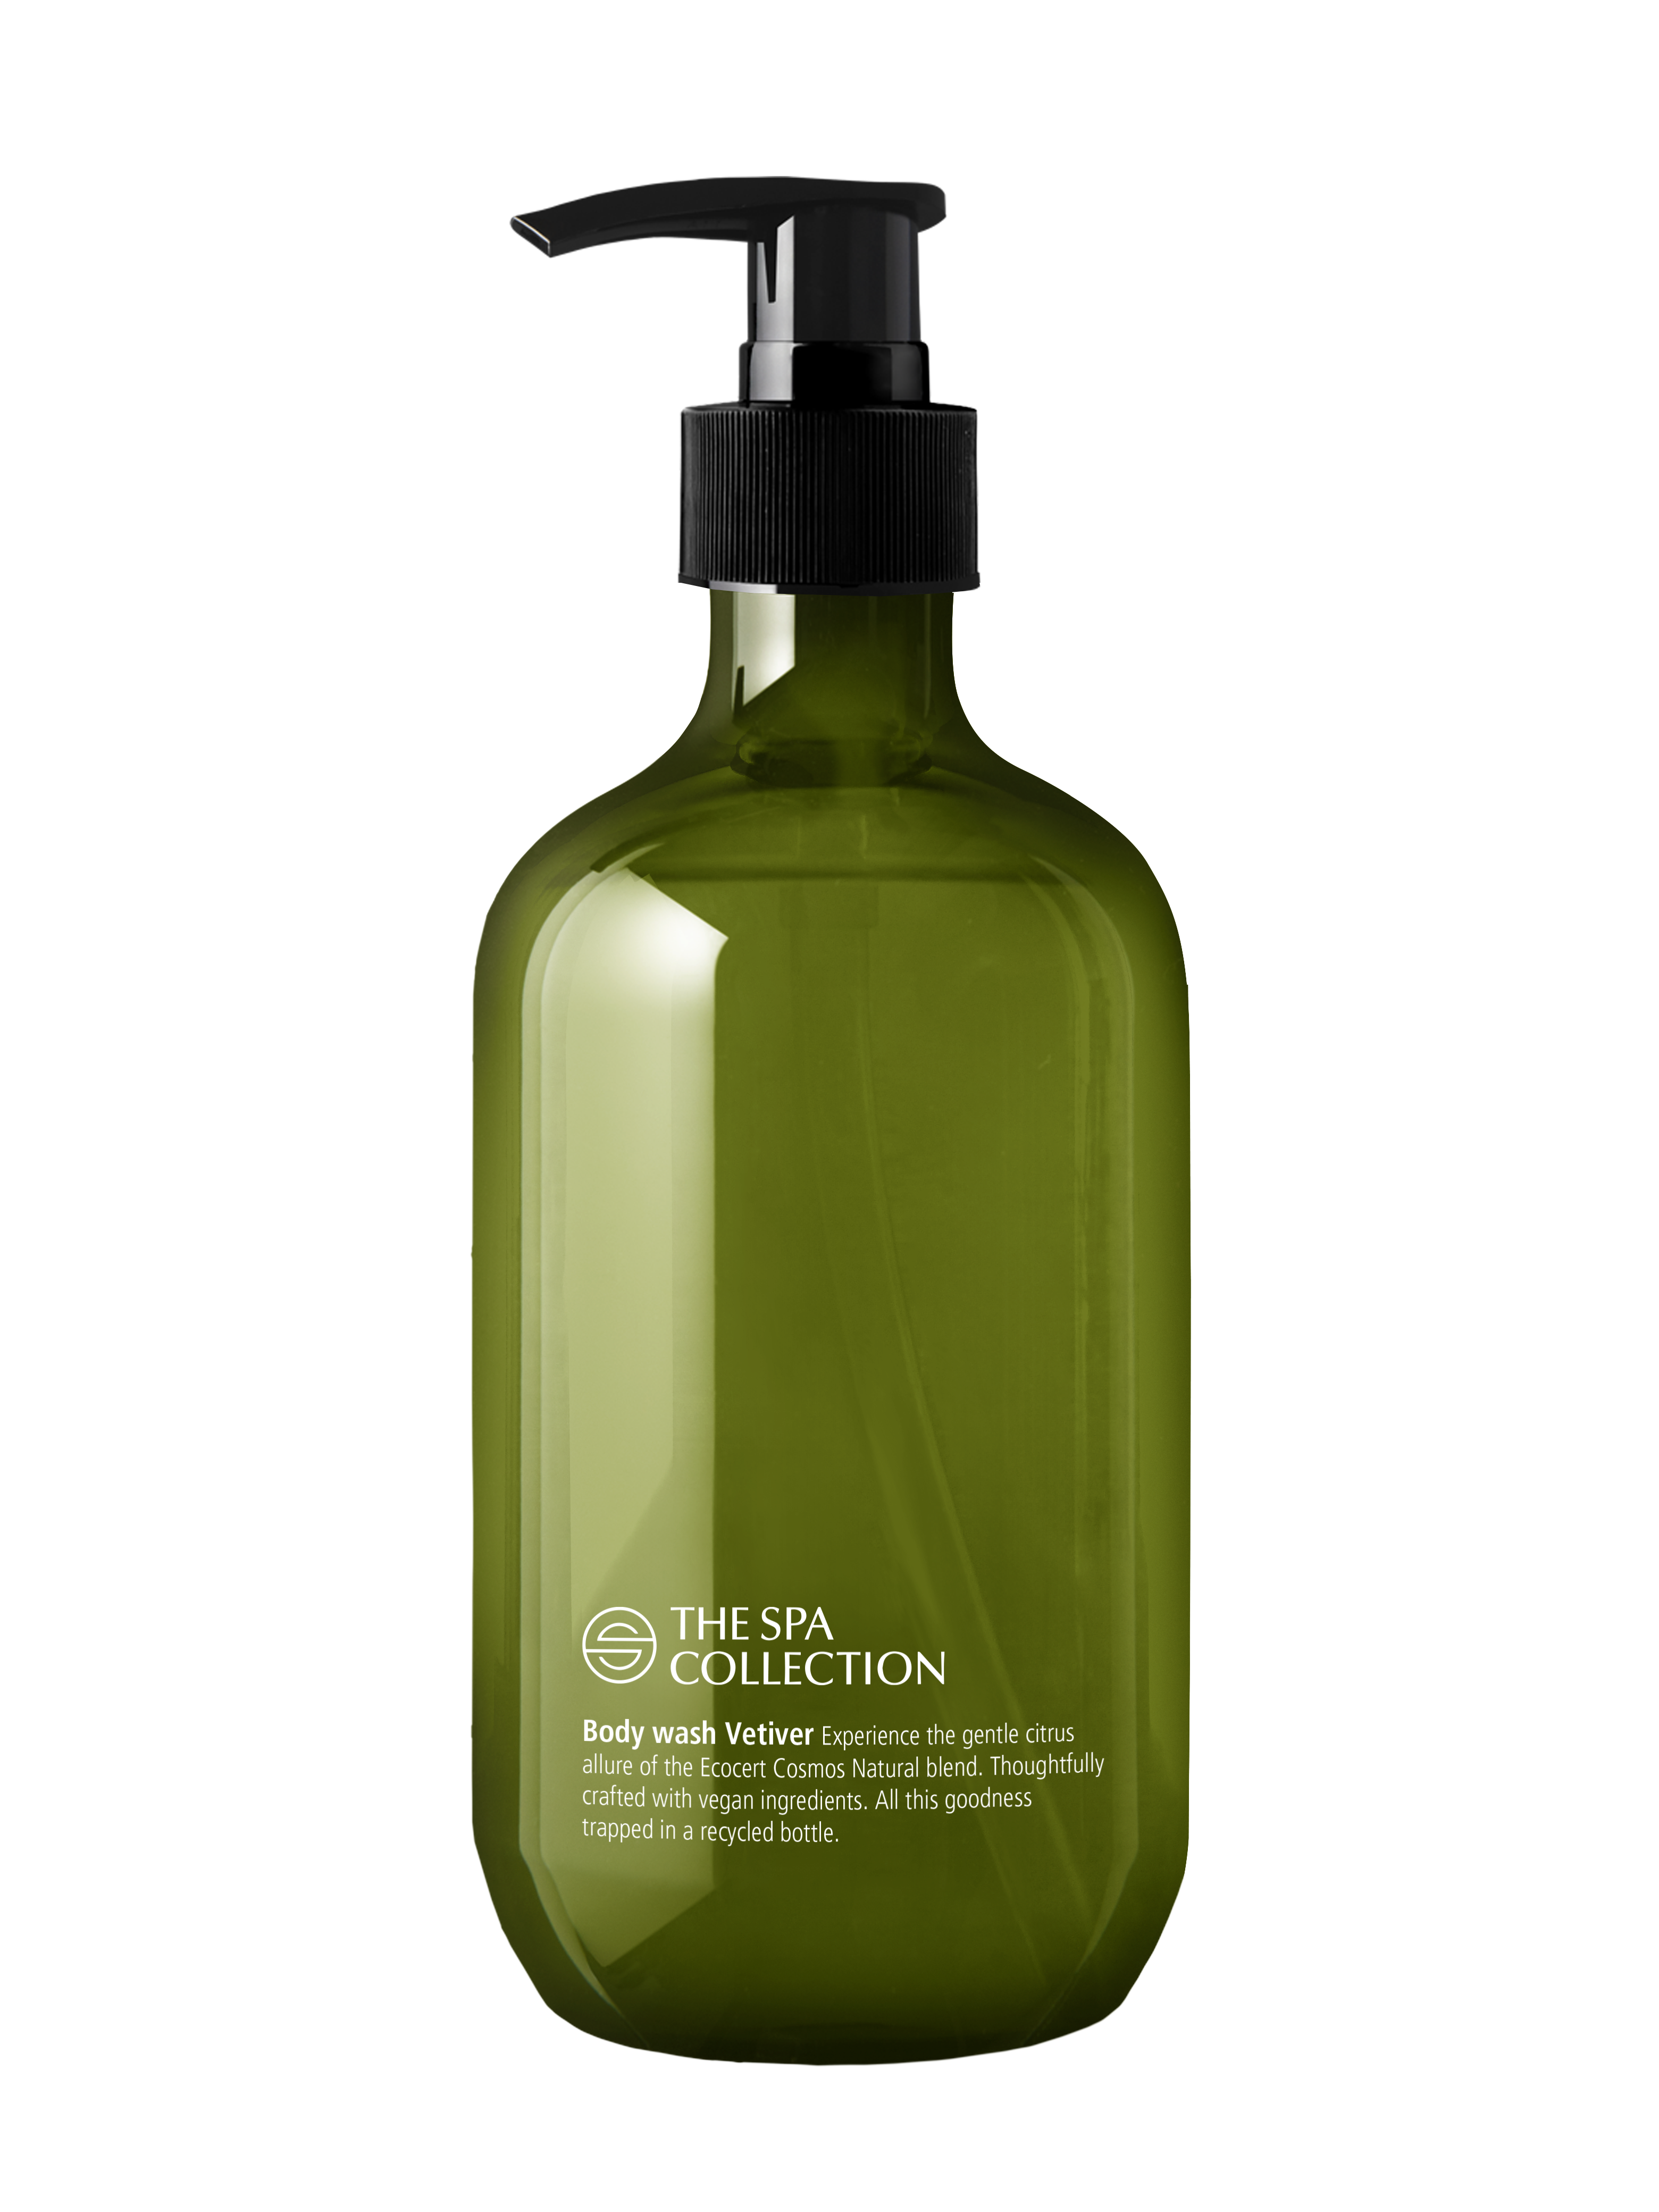 Body wash ecocert - 475ml recycled bottle - The Spa Collection Vetiver